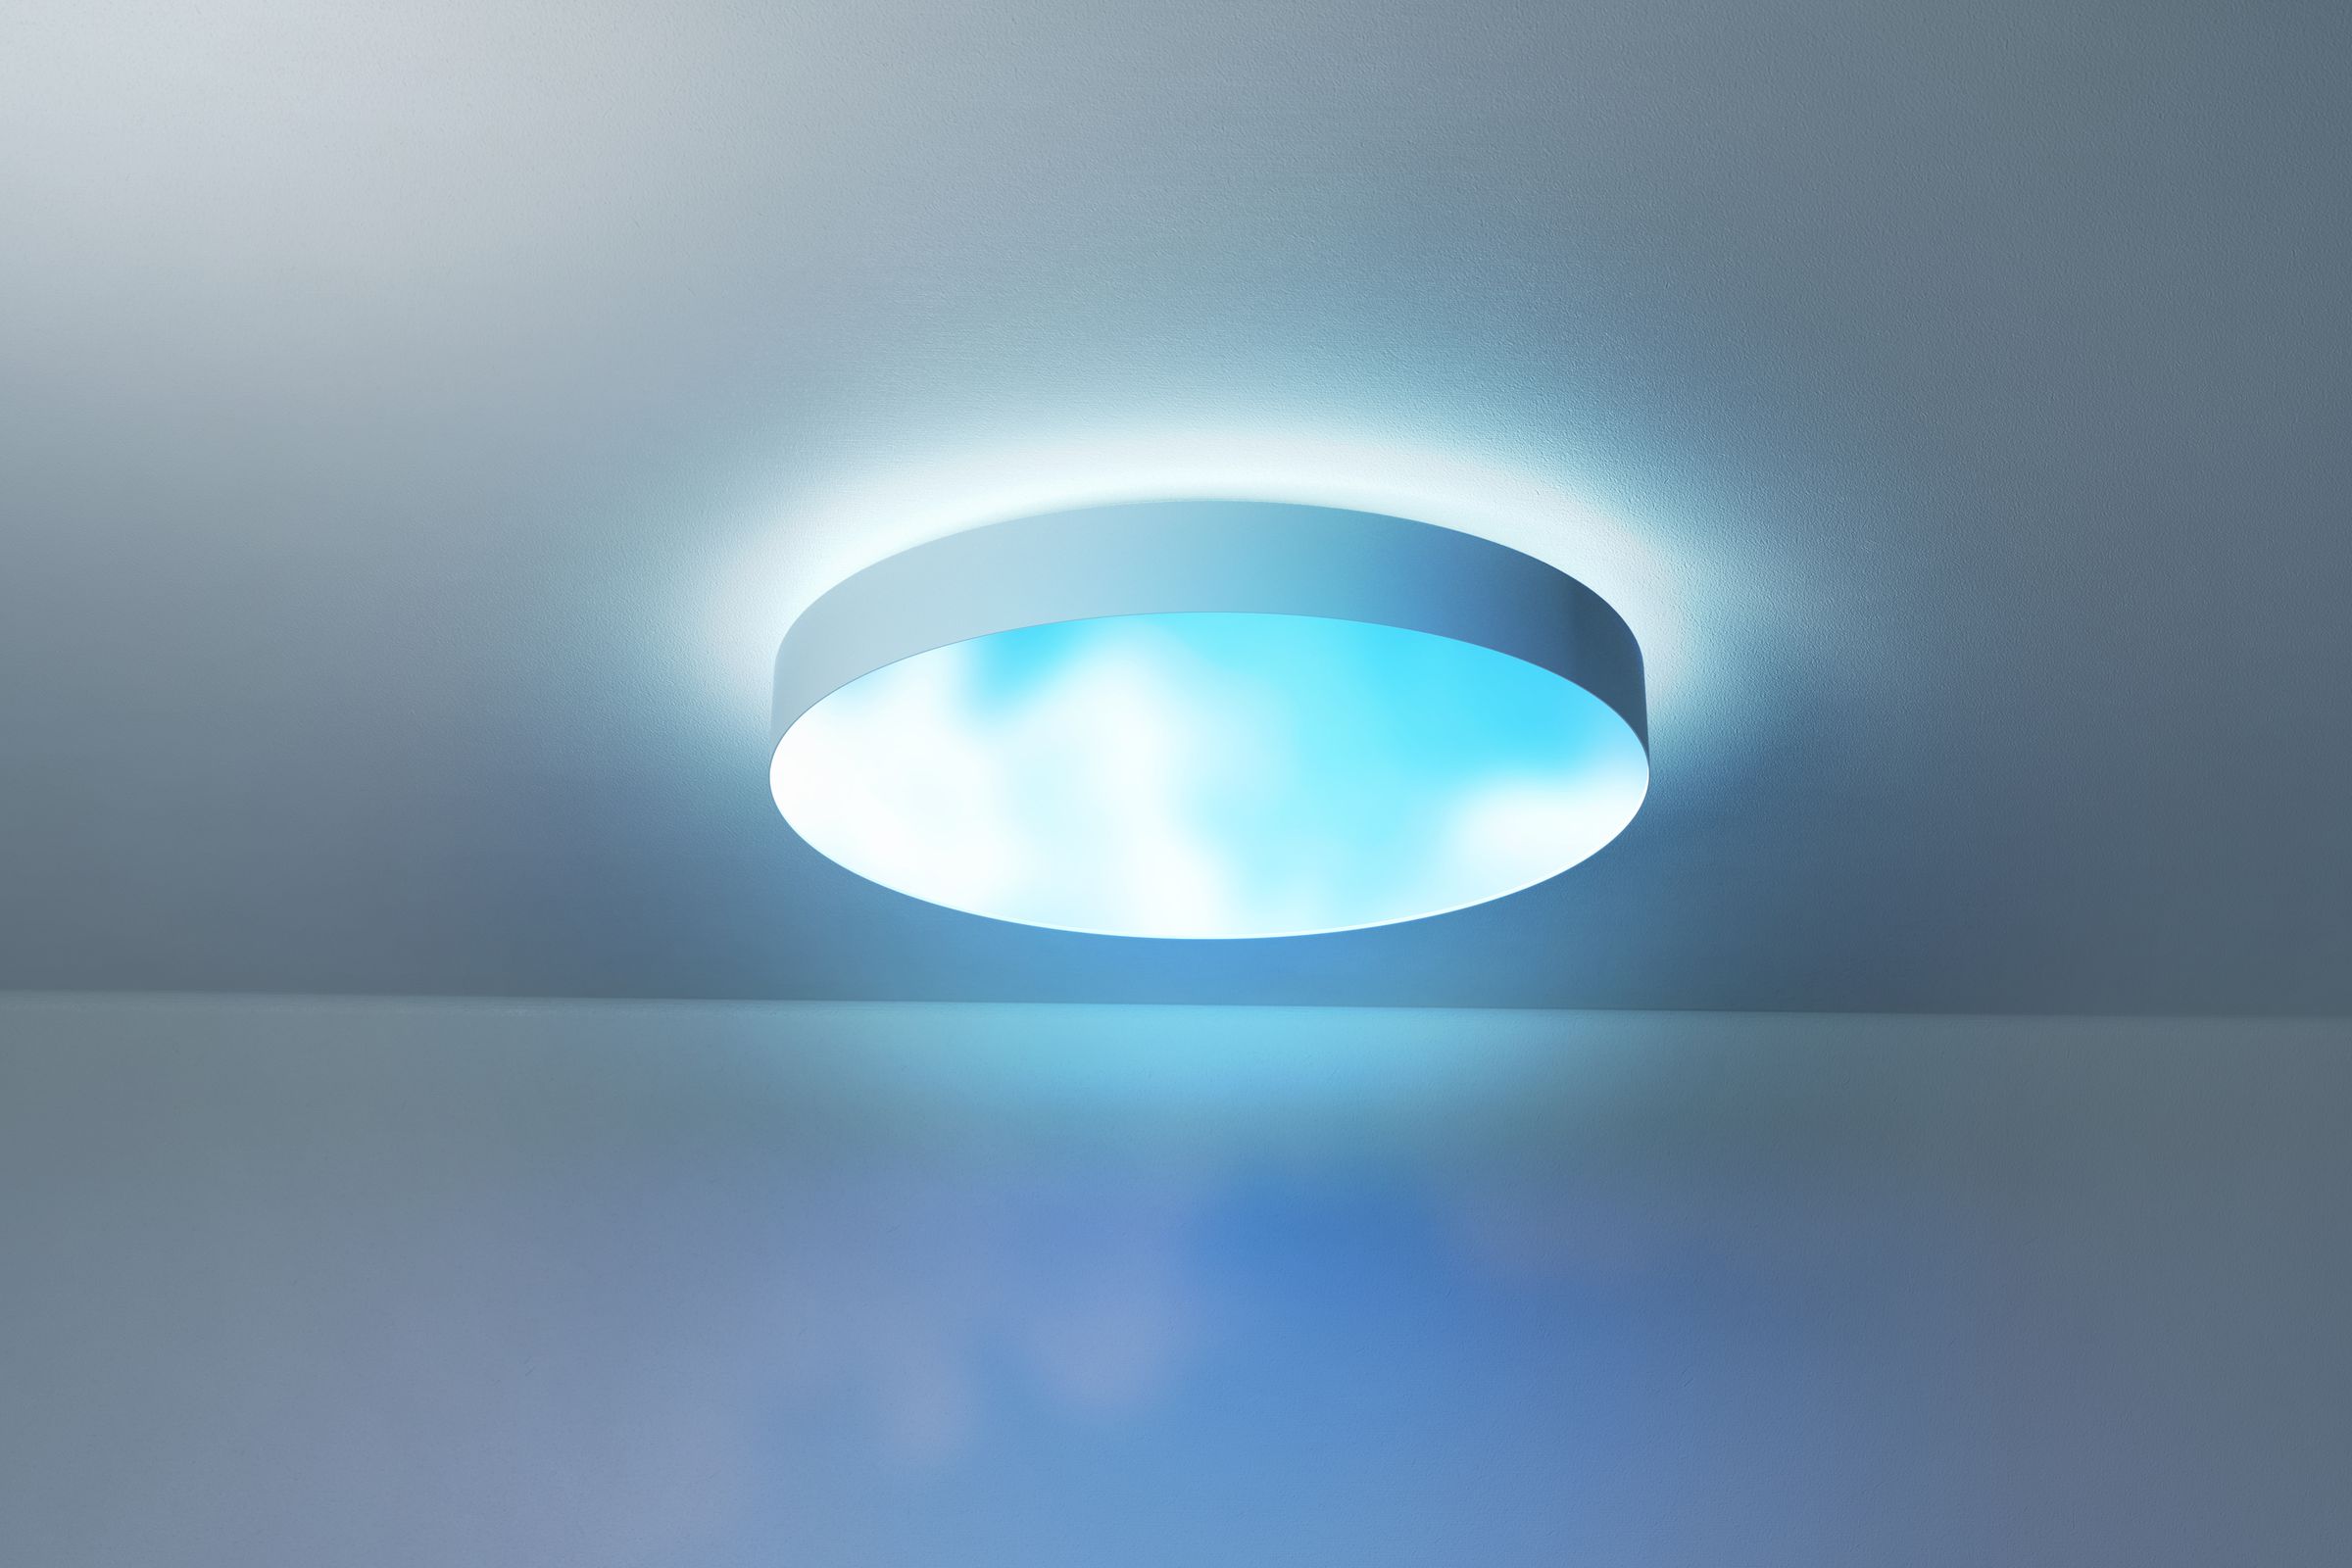 The Lifx ceiling light features full-color, tunable white light and an array of effects to light up your home.